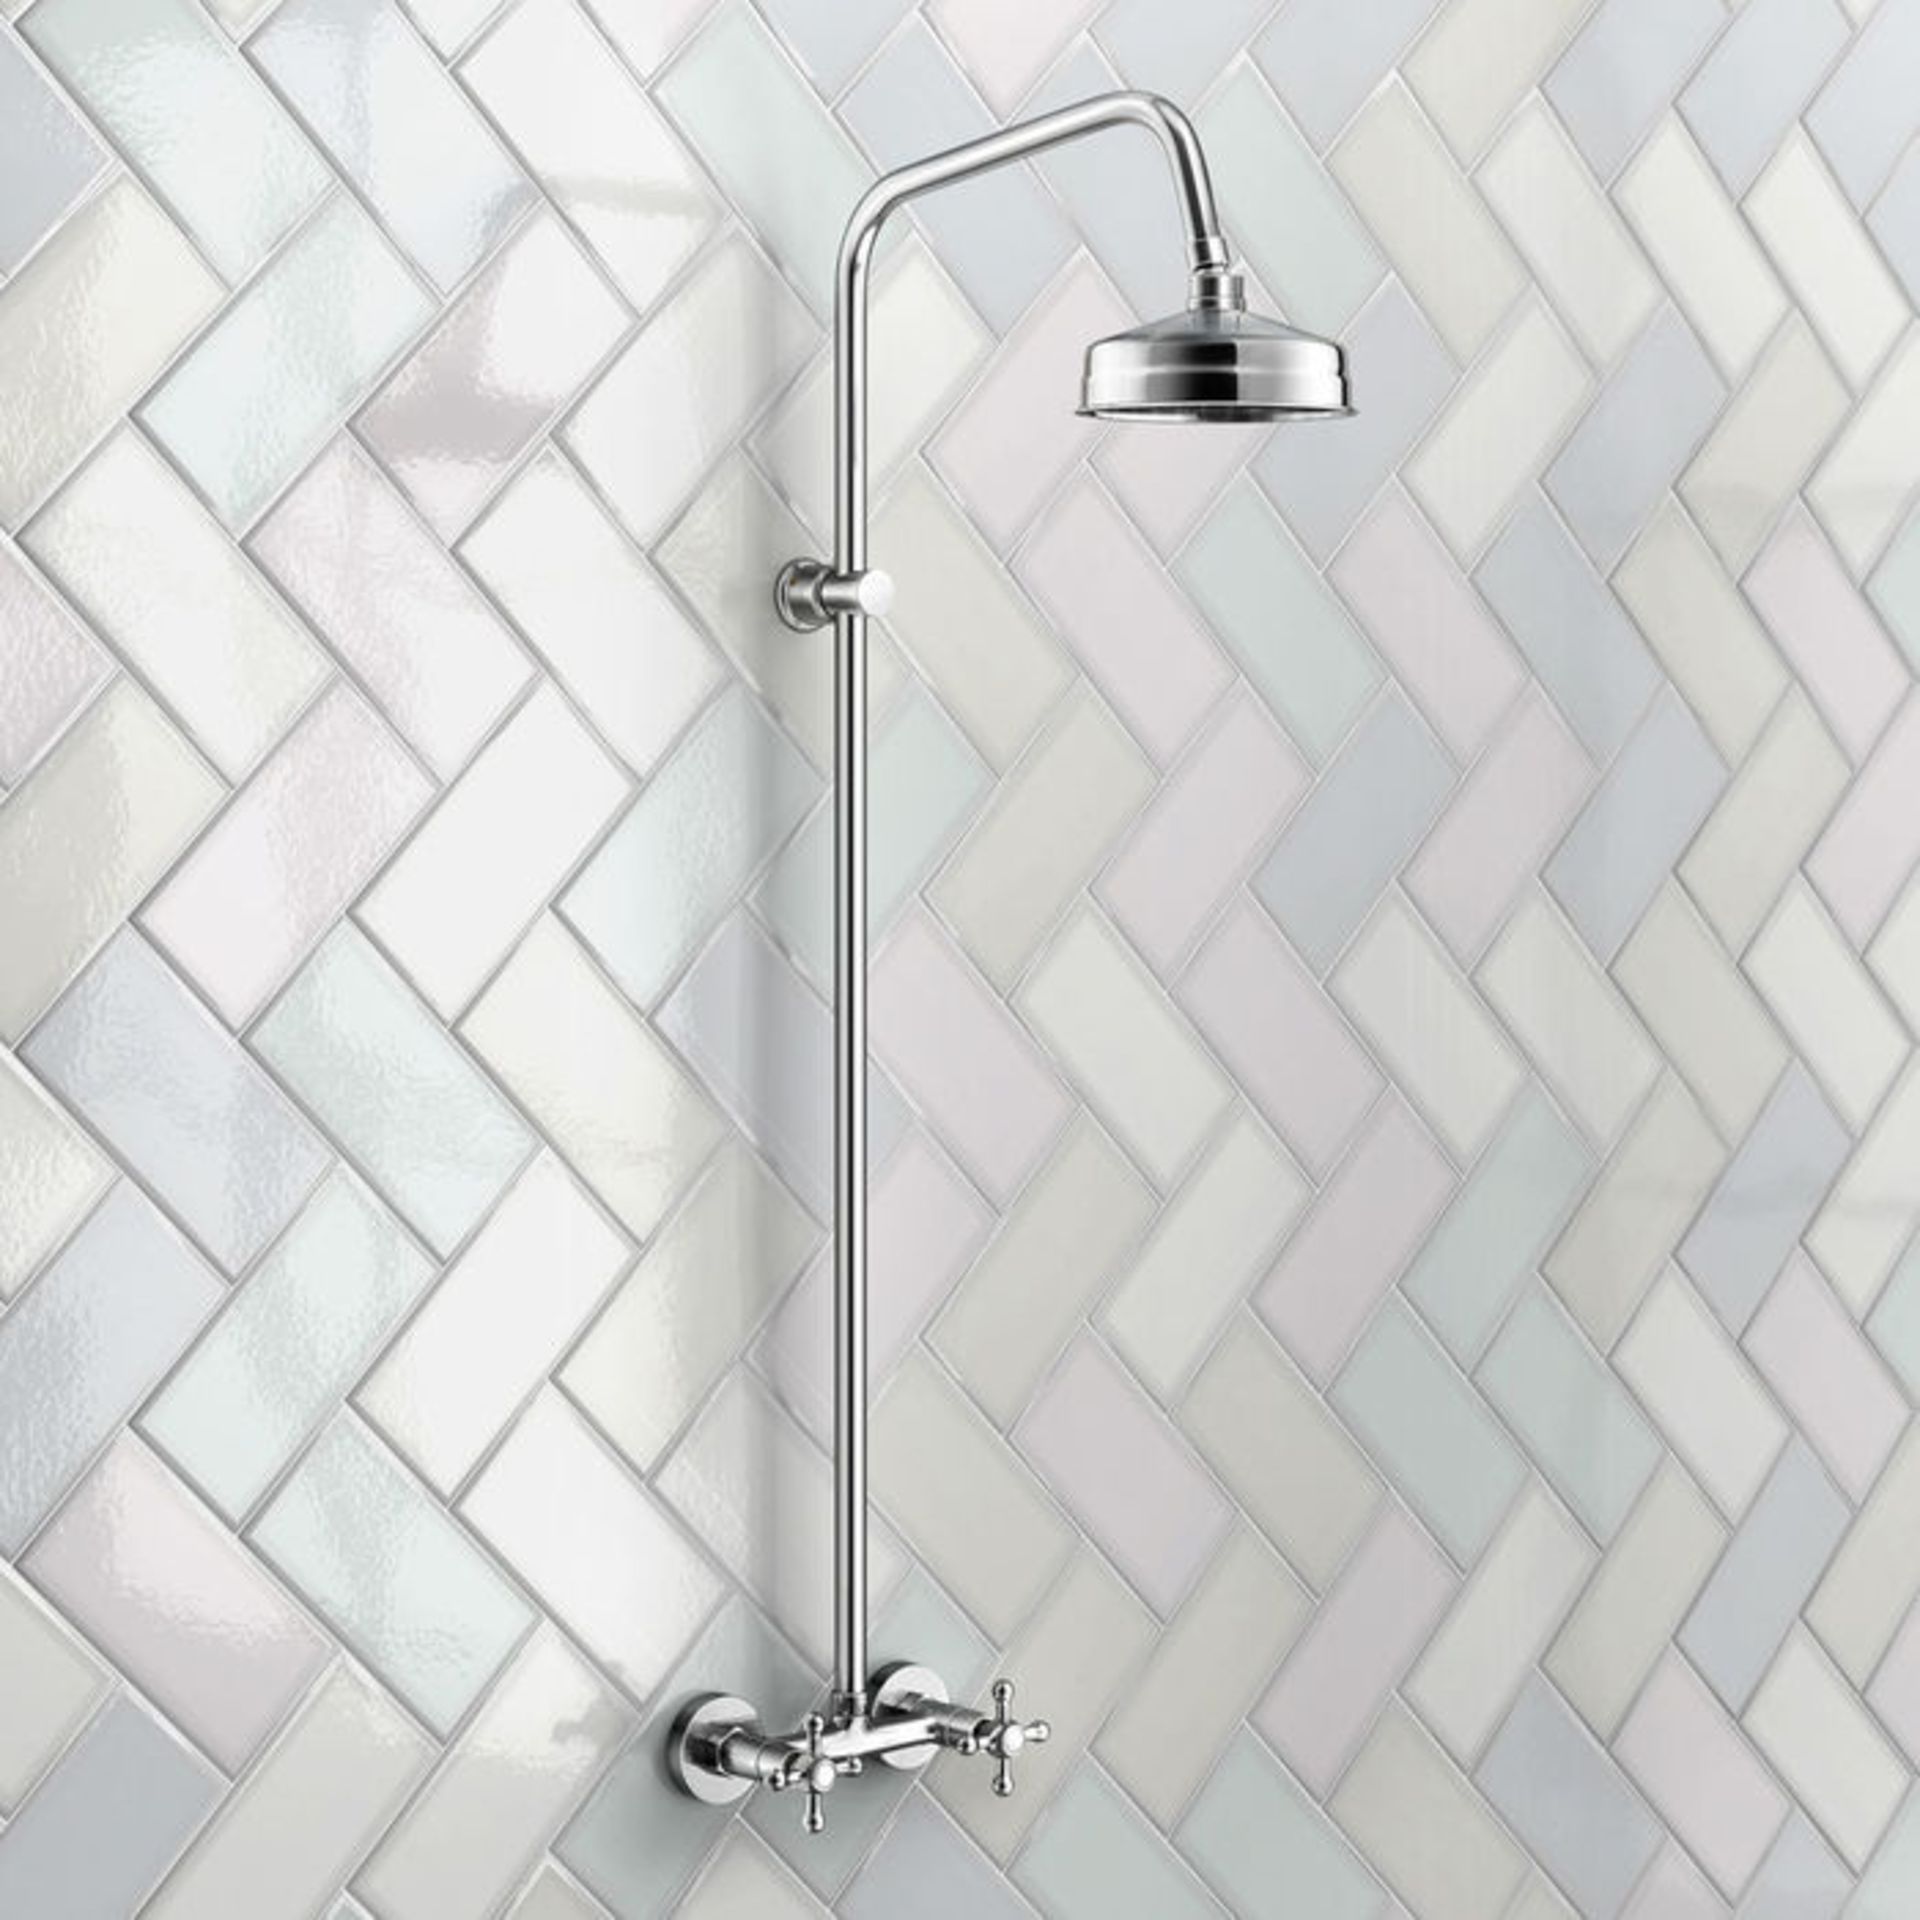 (QW26) Traditional Exposed Shower & Medium Head. Exposed design makes for a statement piece - Image 10 of 12